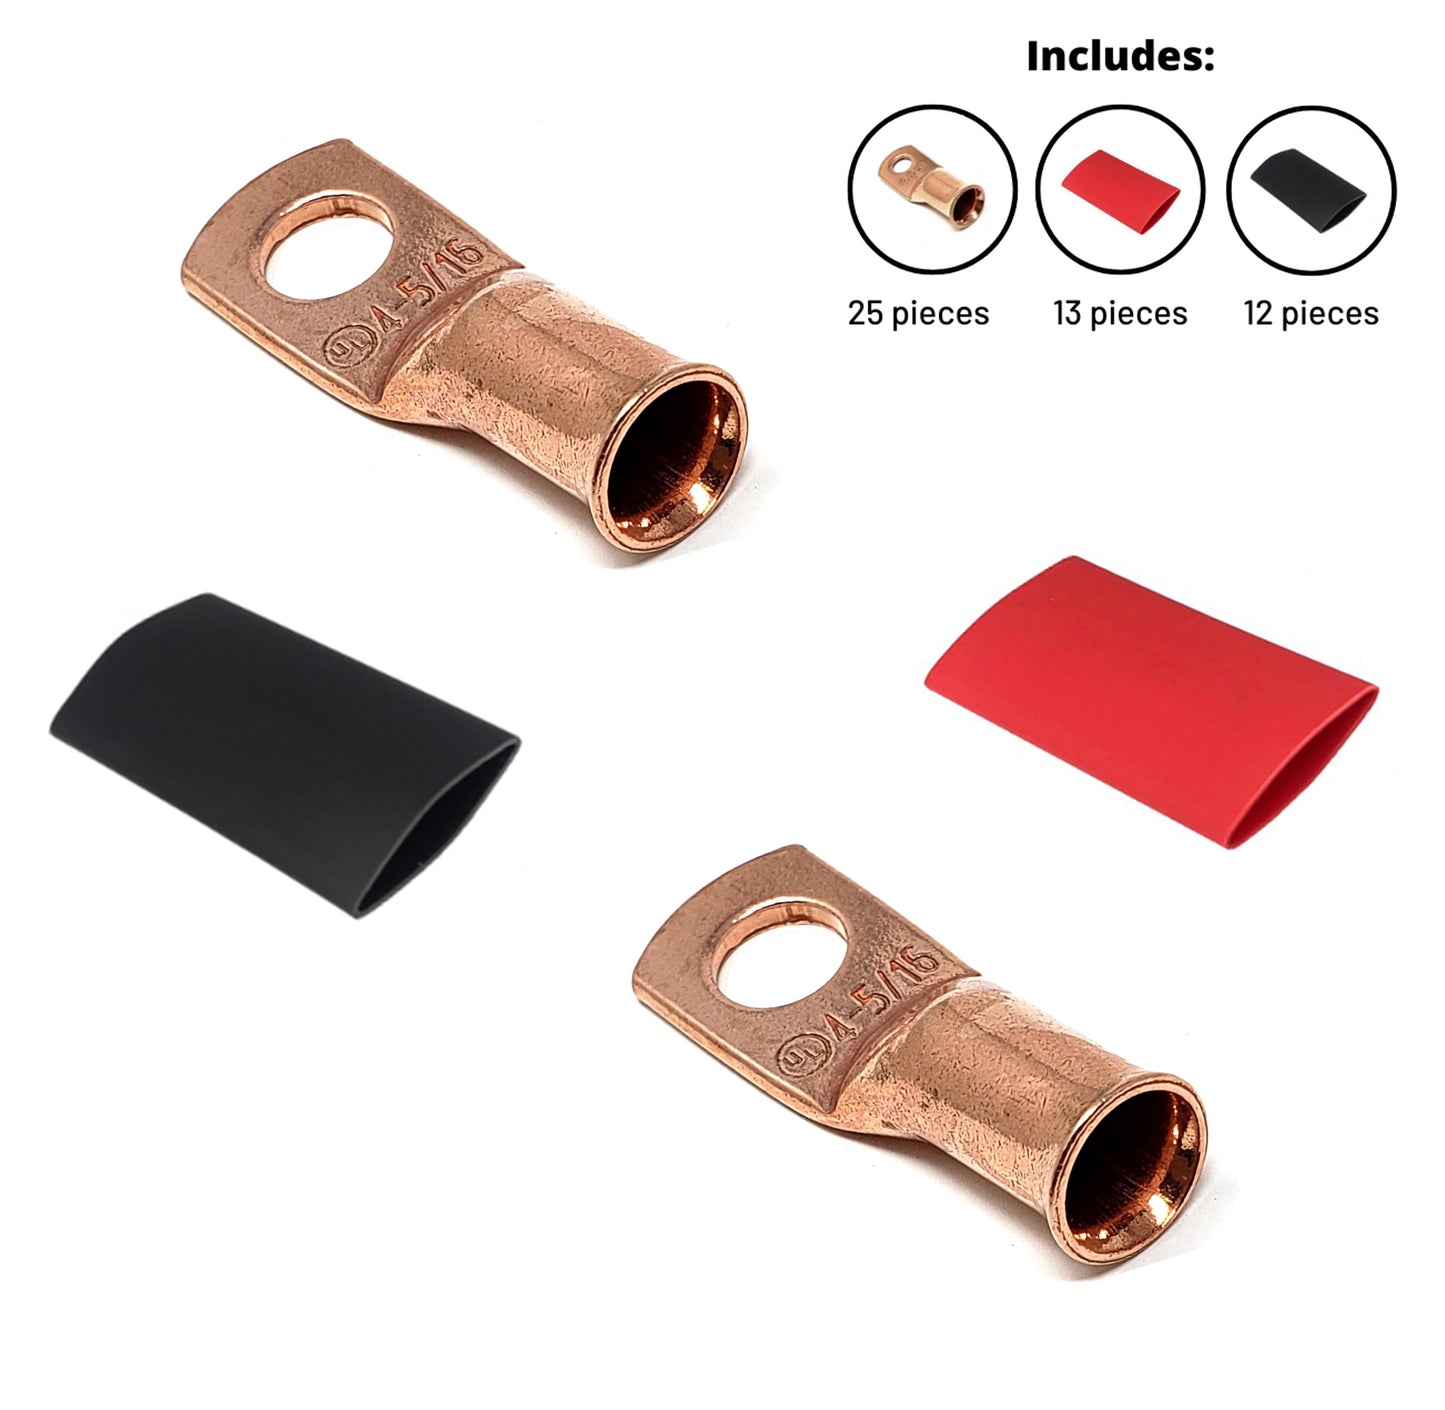 4 gauge pure copper cable lugs with heat shrink